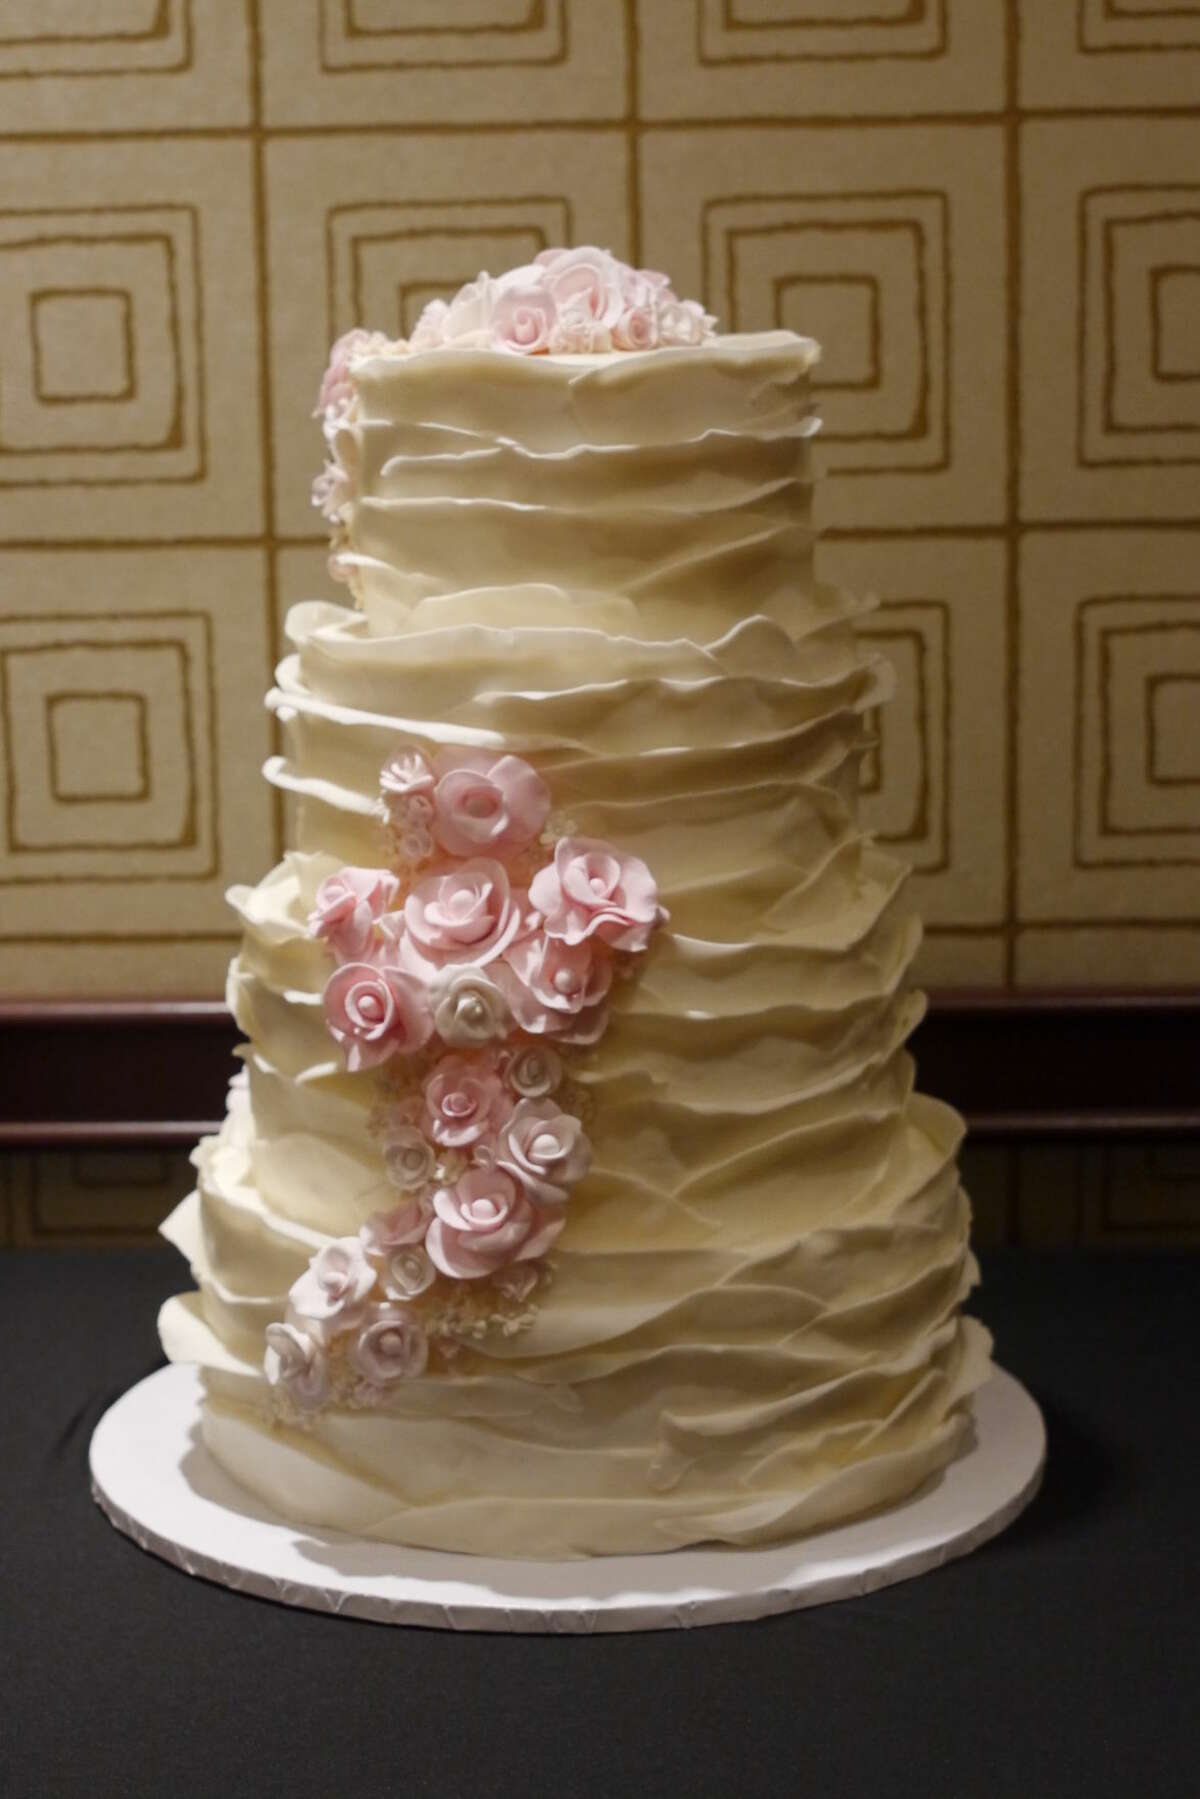 "Spring & Summer" from The Pink Cupcake Shack in Fairfield won the Wedding Cake Challenge.